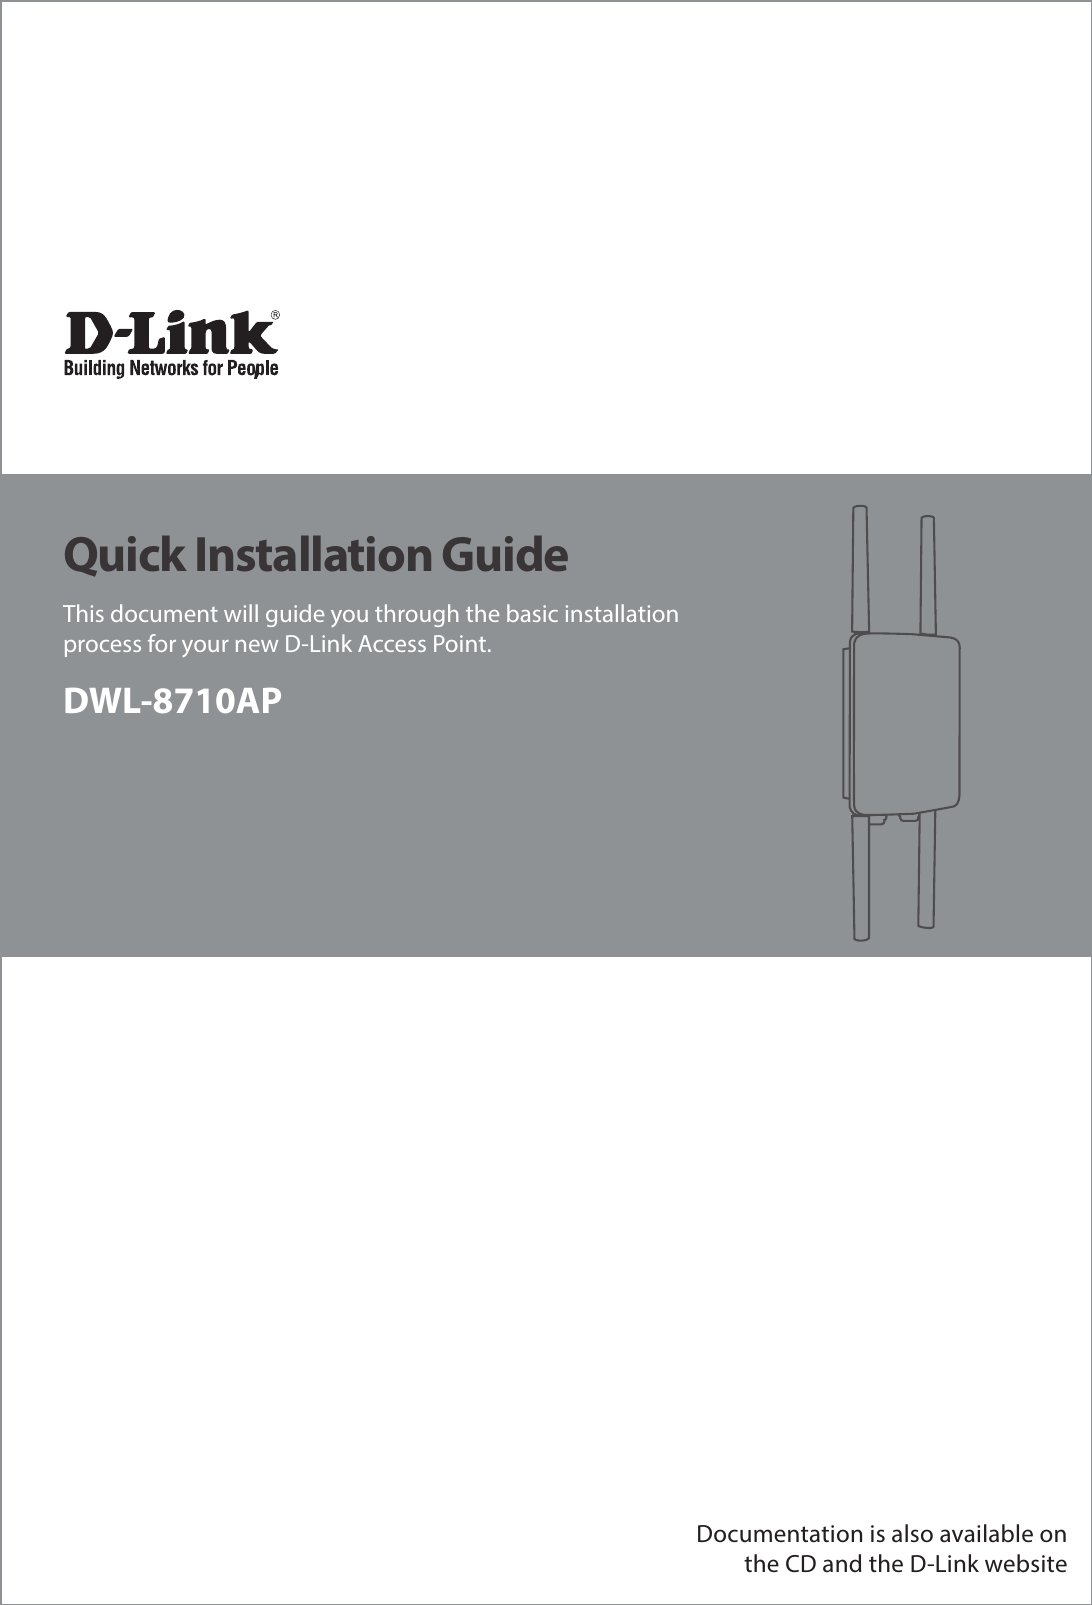 Documentation is also available on the CD and the D-Link websiteThis document will guide you through the basic installation process for your new D-Link Access Point.DWL-8710AP  Quick Installation Guide